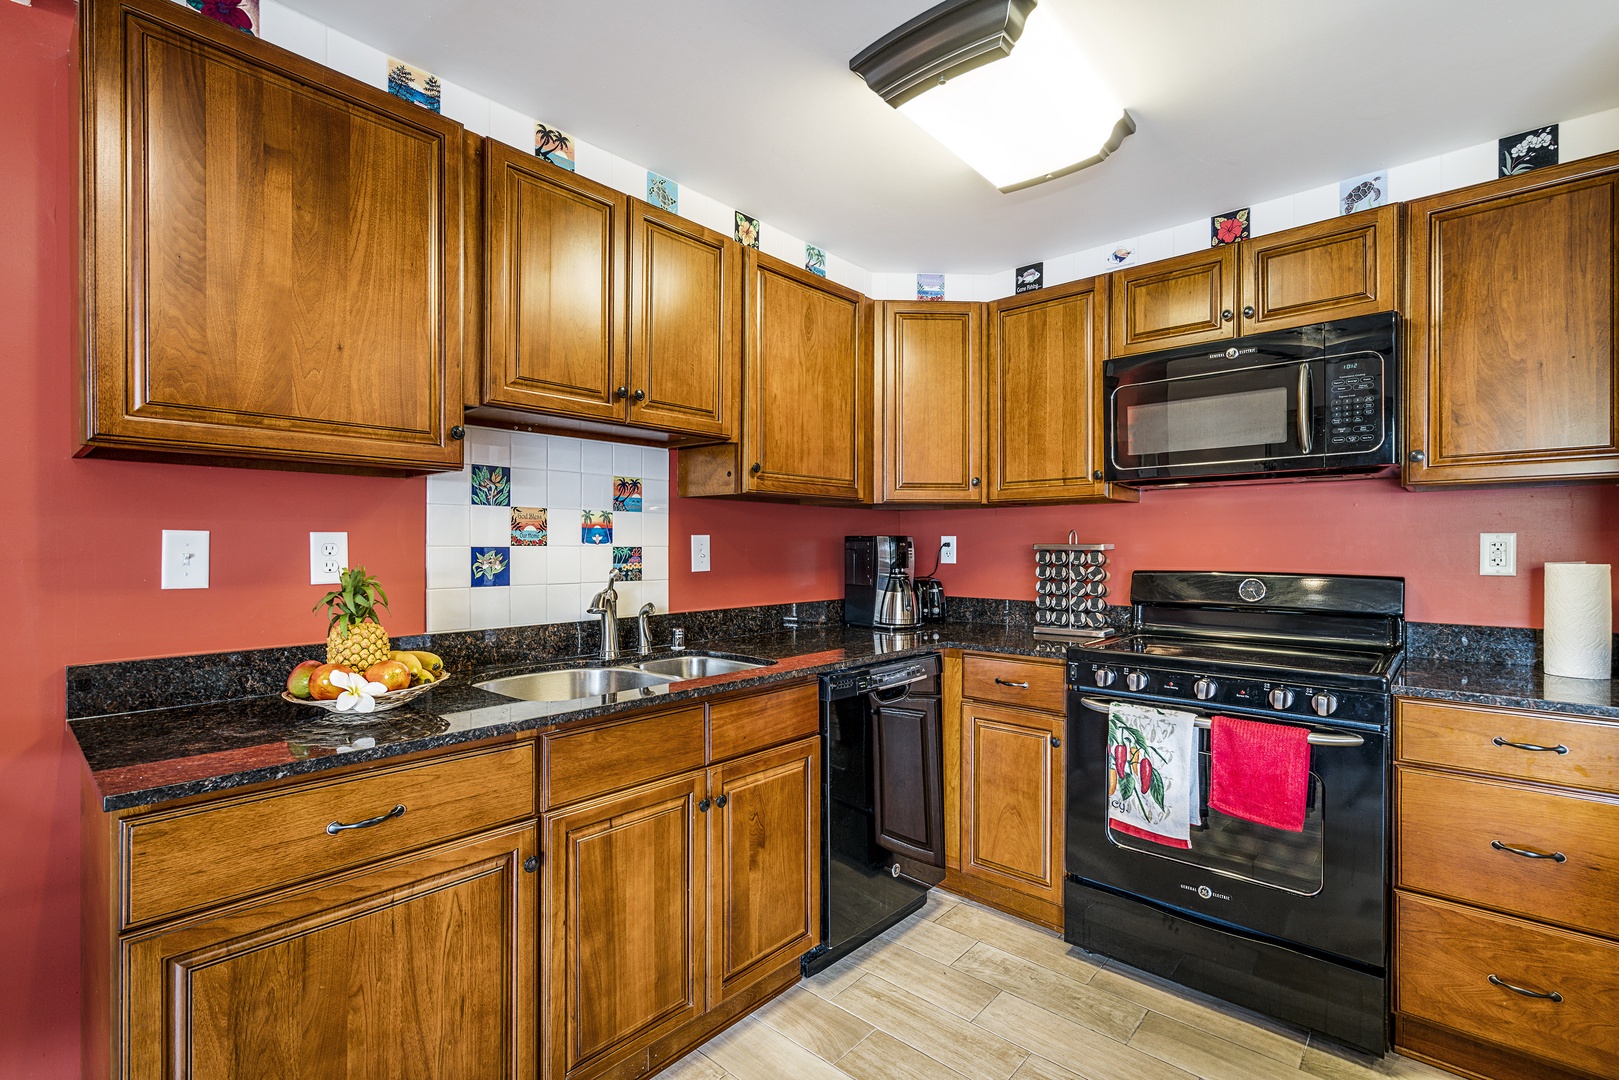 Kailua Kona Vacation Rentals, OFB Kona Plaza 112 - Beautiful kitchen with all the essentials to make a wonderful home cooked meal!